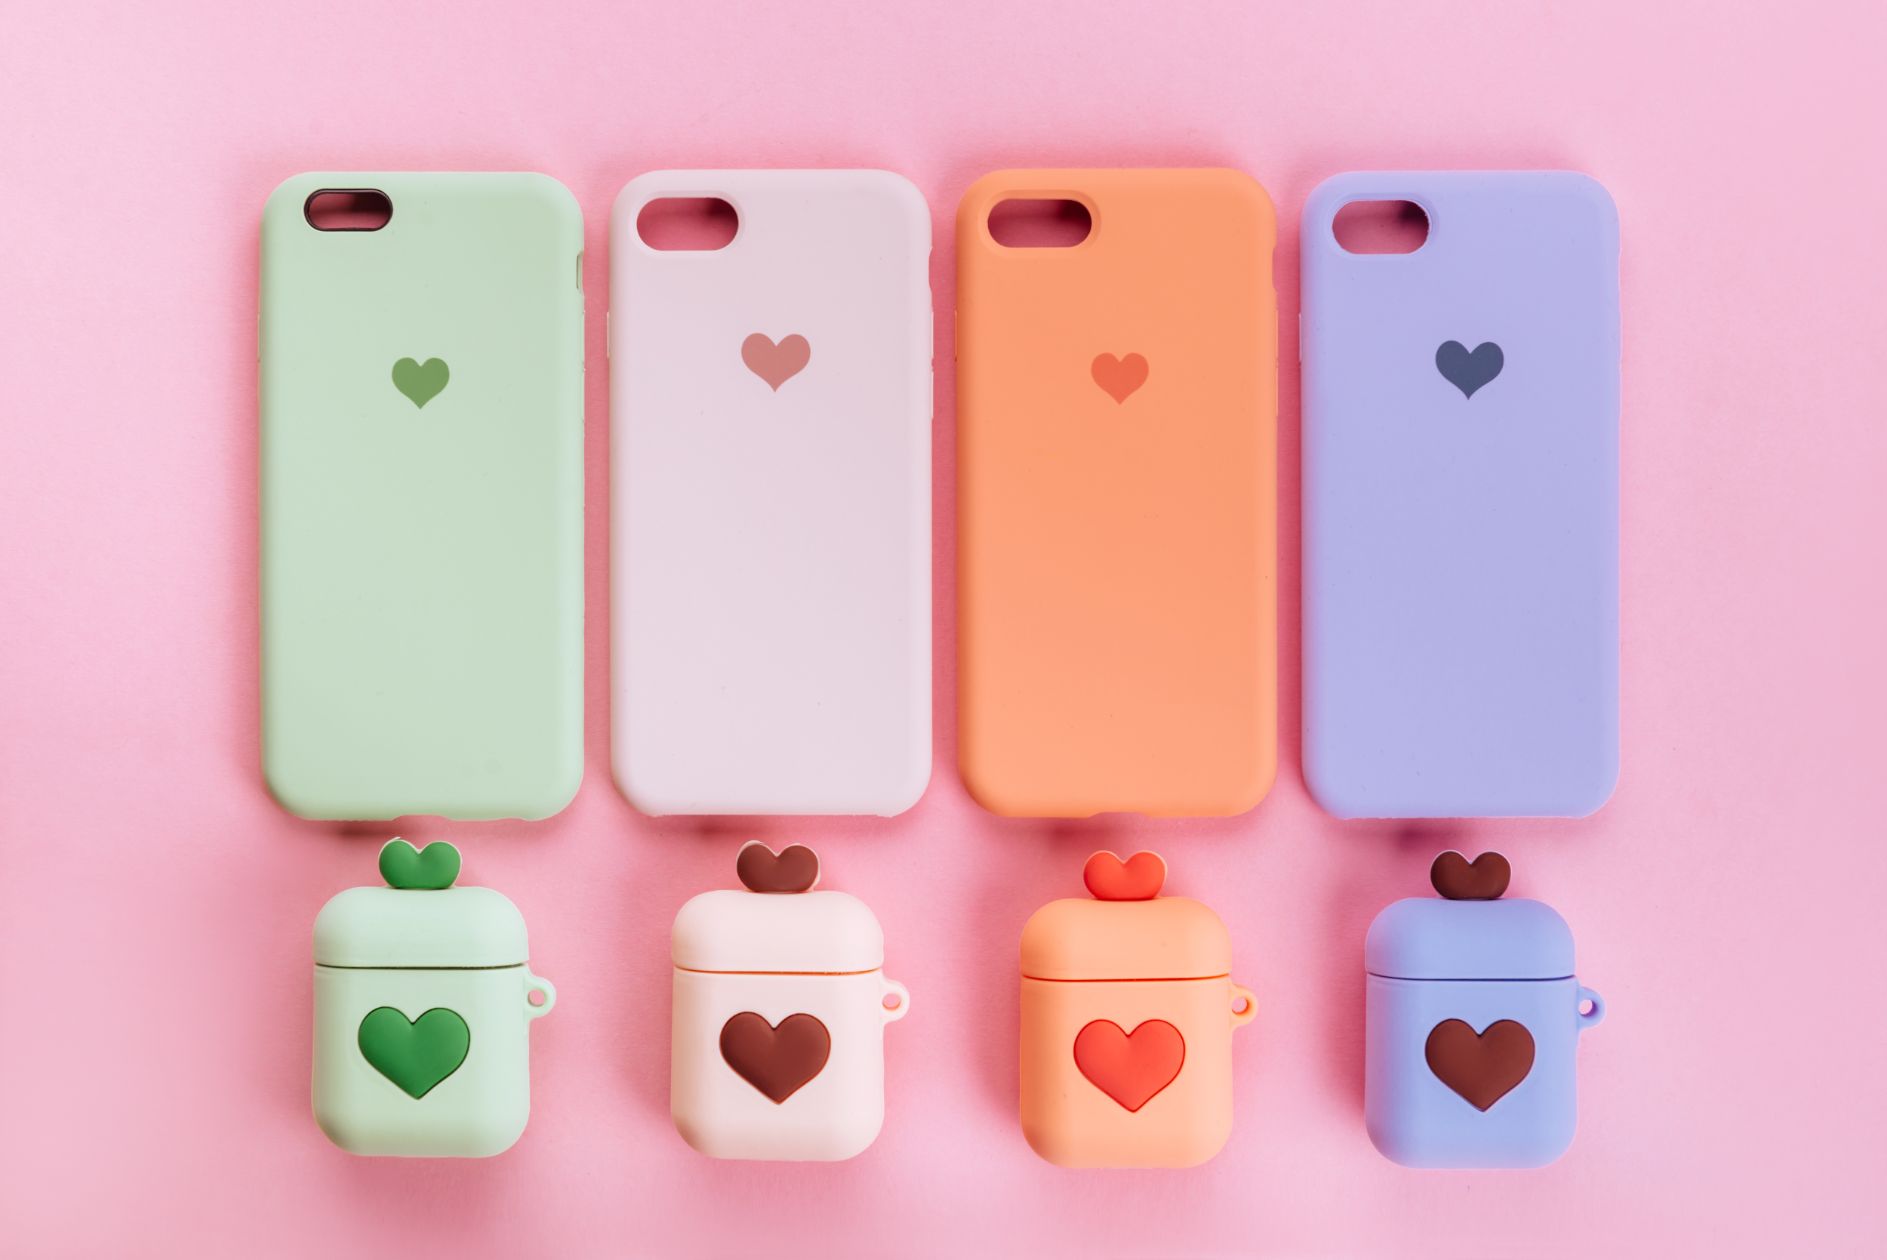 Heart / Hearts Phone Case available in iPhone & Android 